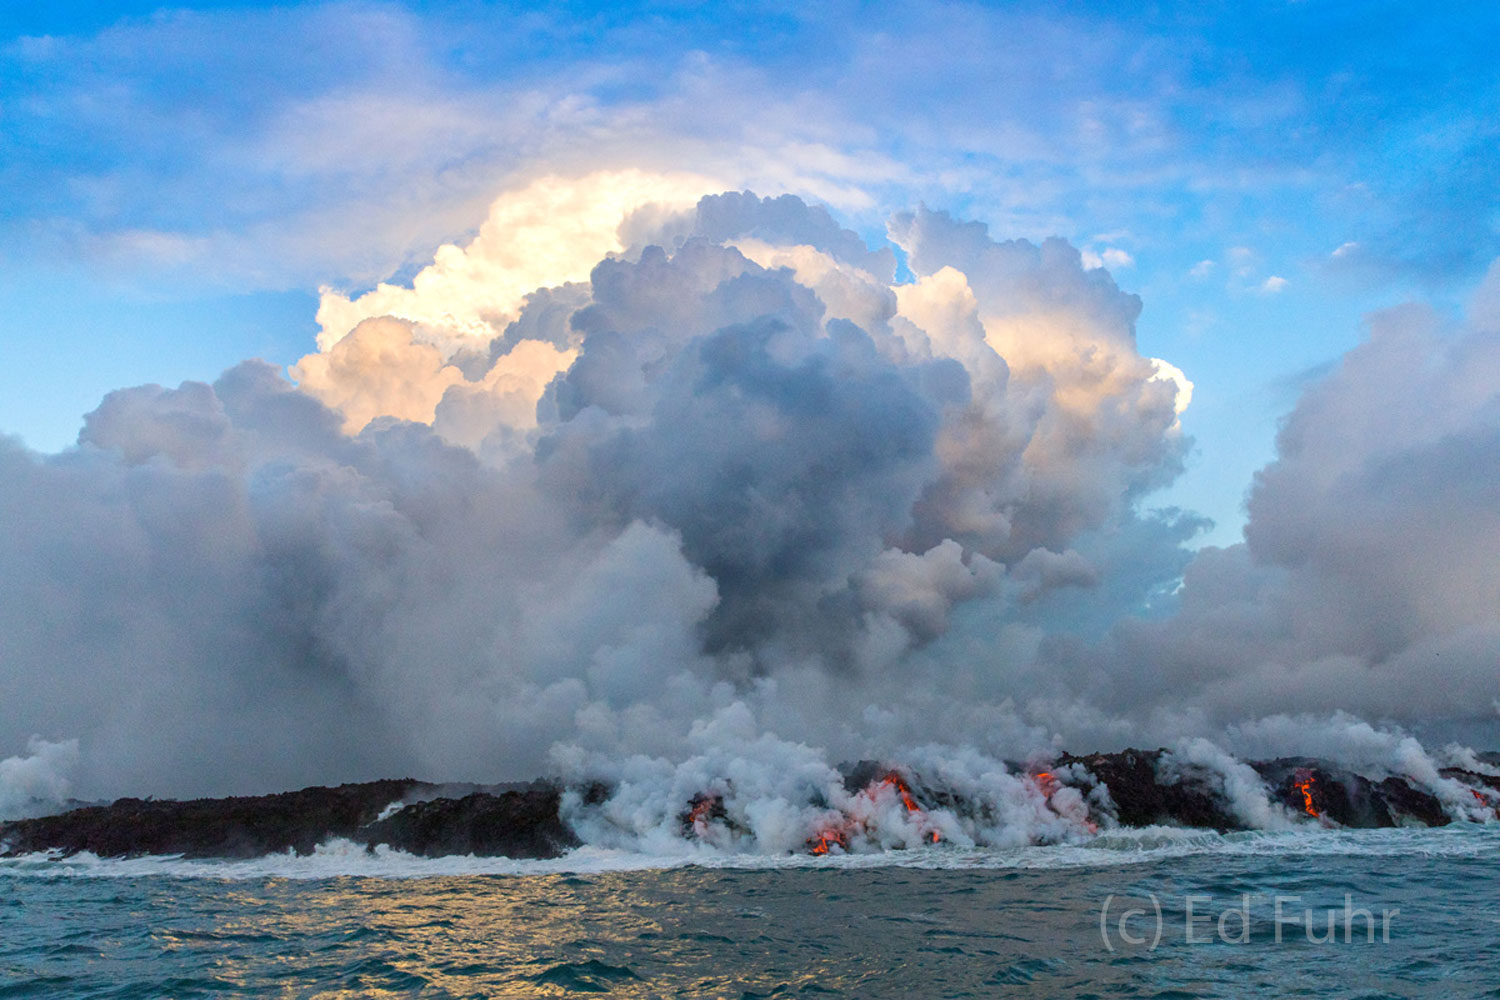 Pulling away from the lava flow as the sun rises, we see the steamy spectacle catches dawn's first ray